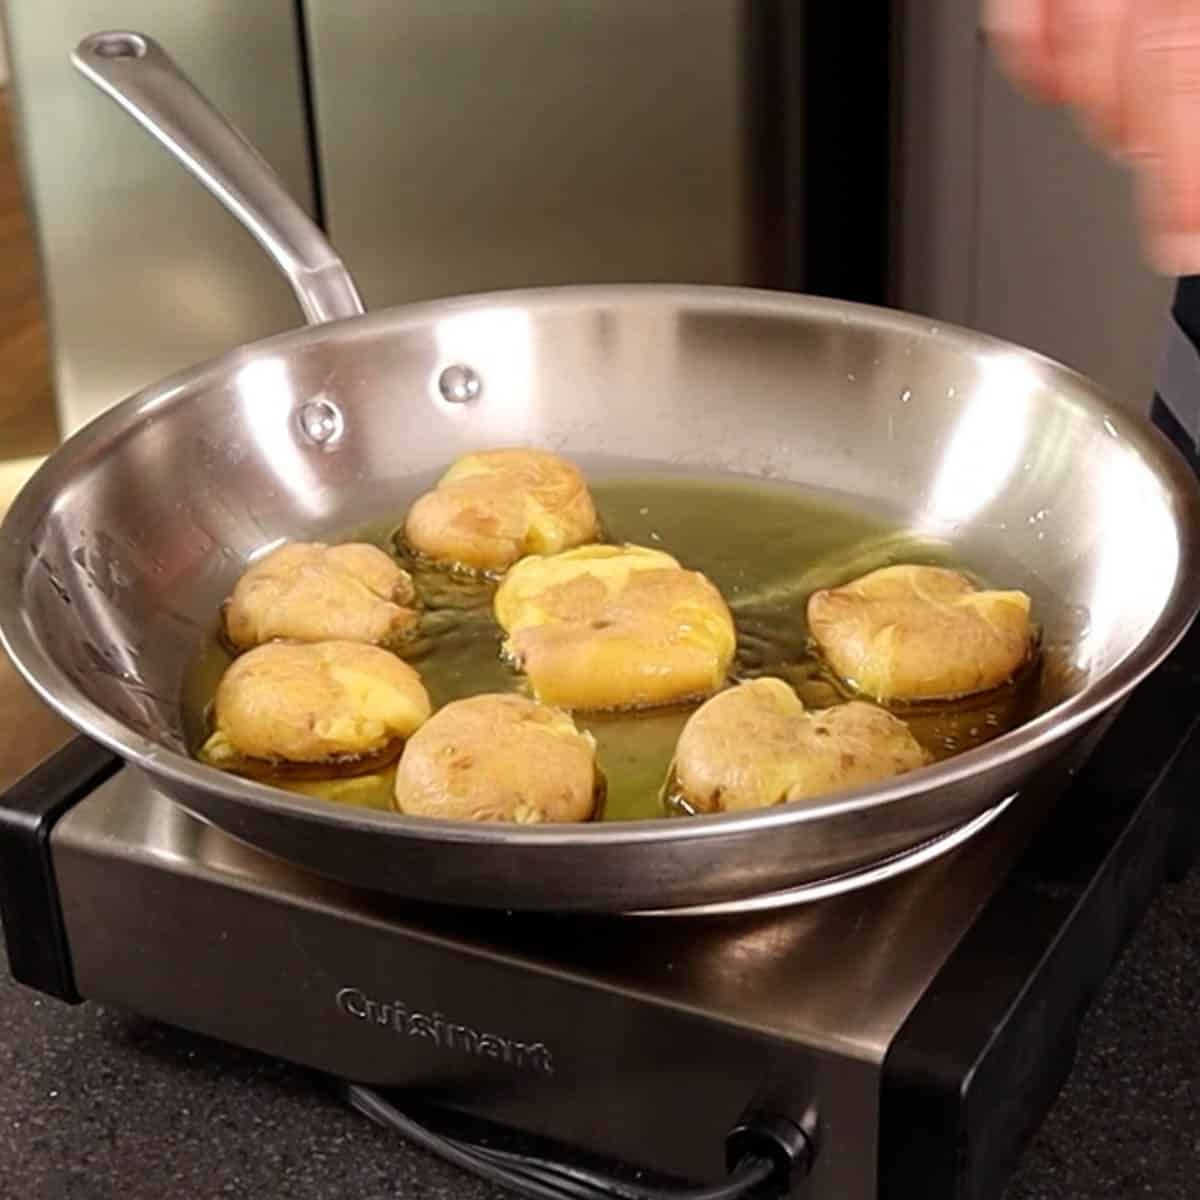 Smashed potatoes in a stainless steel frying pan.